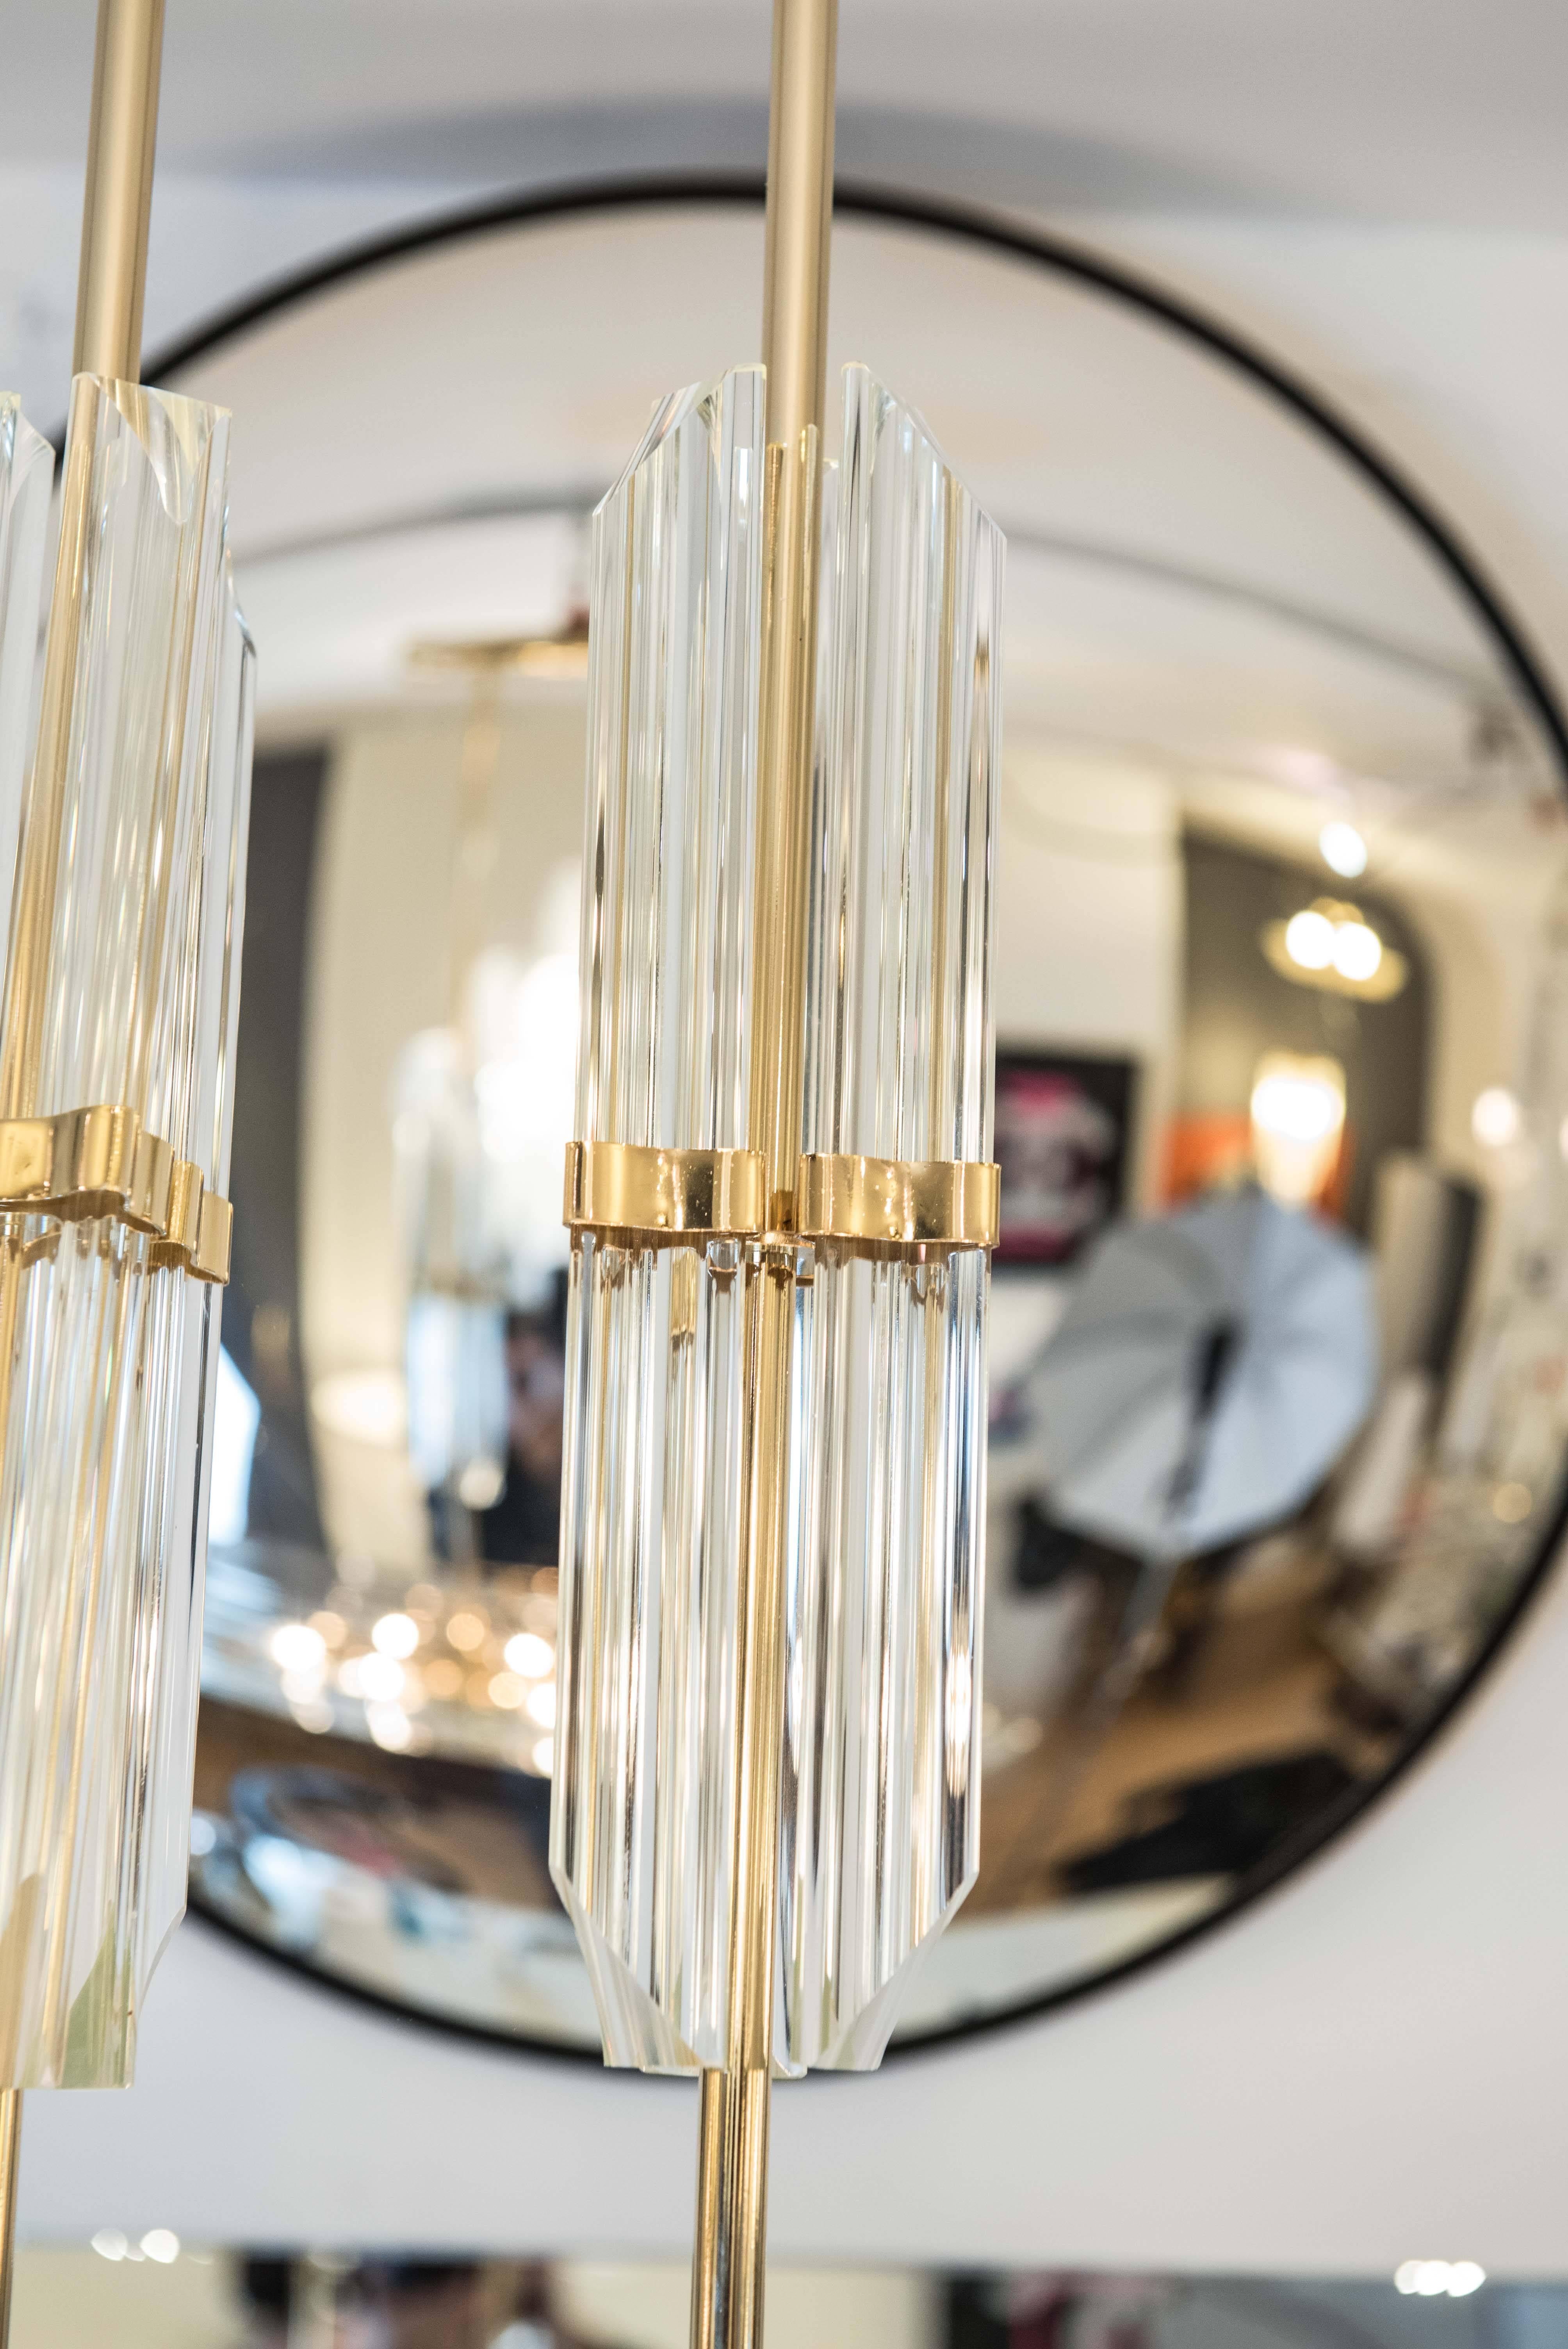 This exquisite pendant light consists of eleven 31